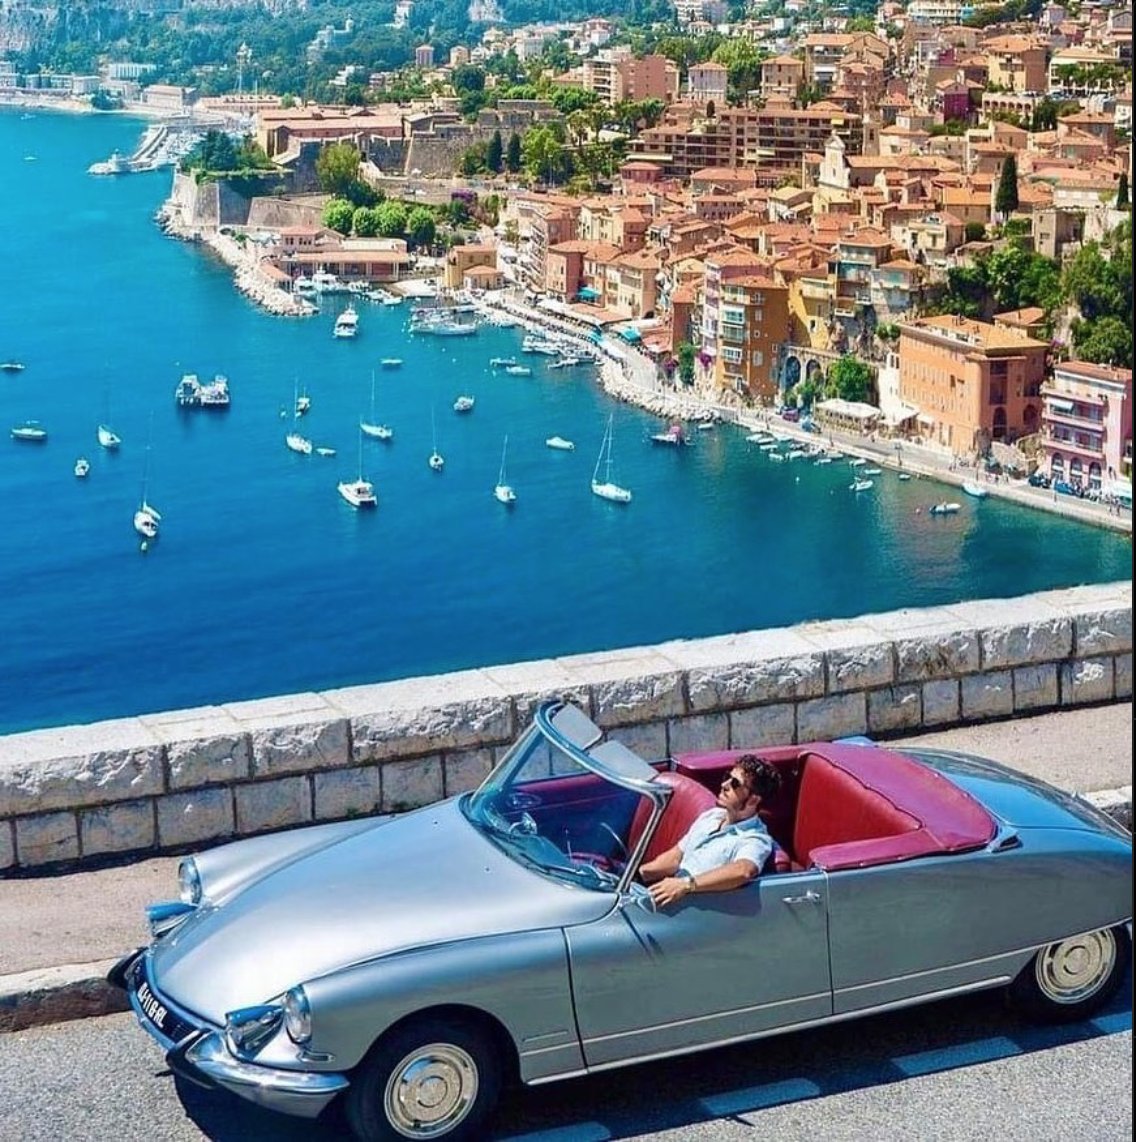 #theweeknd #theweekend #citroends #ds19 #convertible #cabrio #chapron #luxurycars #60s #60sstyle #frenchcars #frenchriviera #riviera #lifestyle #cotedazur #lifestylephotography #travelphotography #landscapephotography #carphotography #beyondcoolmag #motion #travel #urban #life